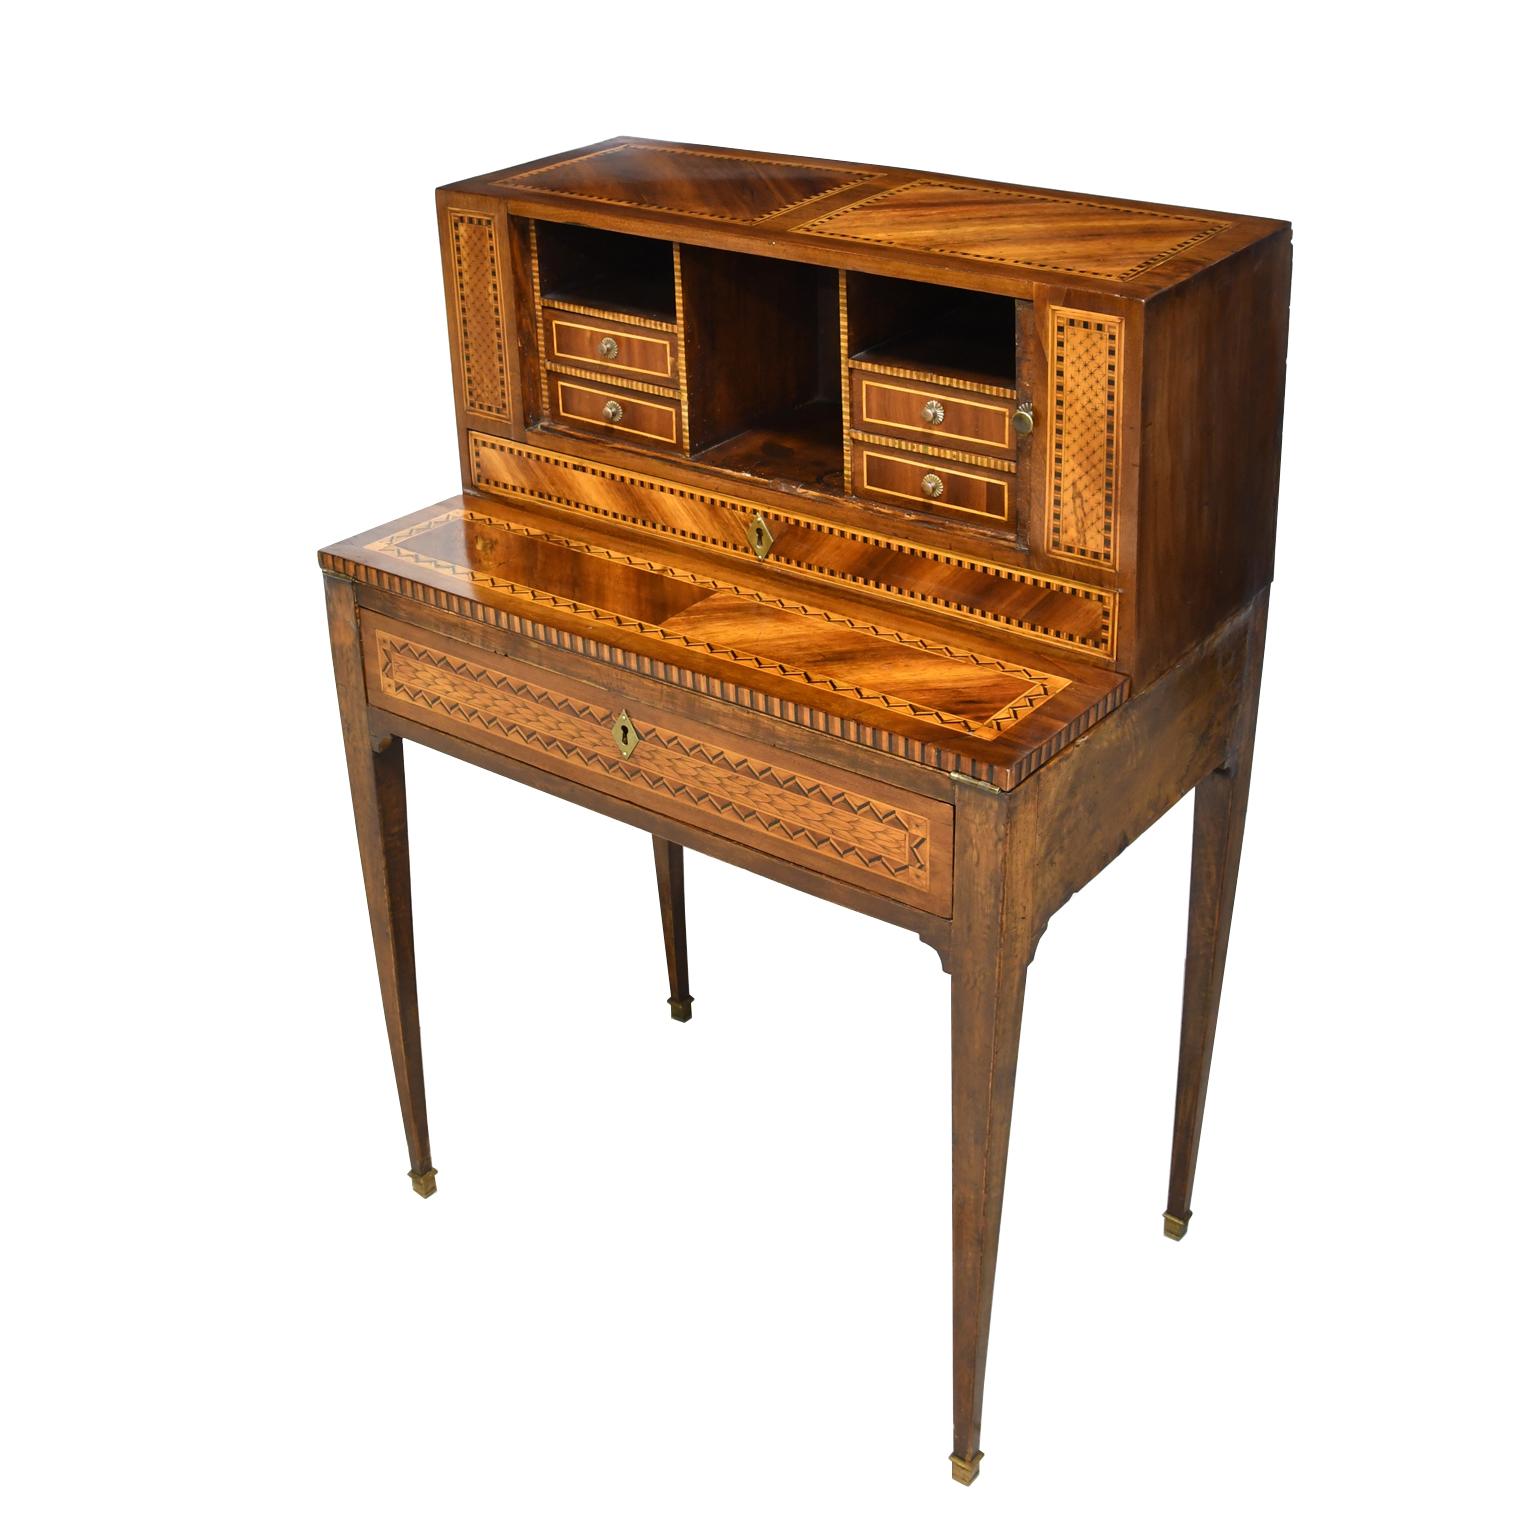 A very lovely lady's writing desk in mahogany with marquetry inlays in geometric patterns using various contrasting woods. This 